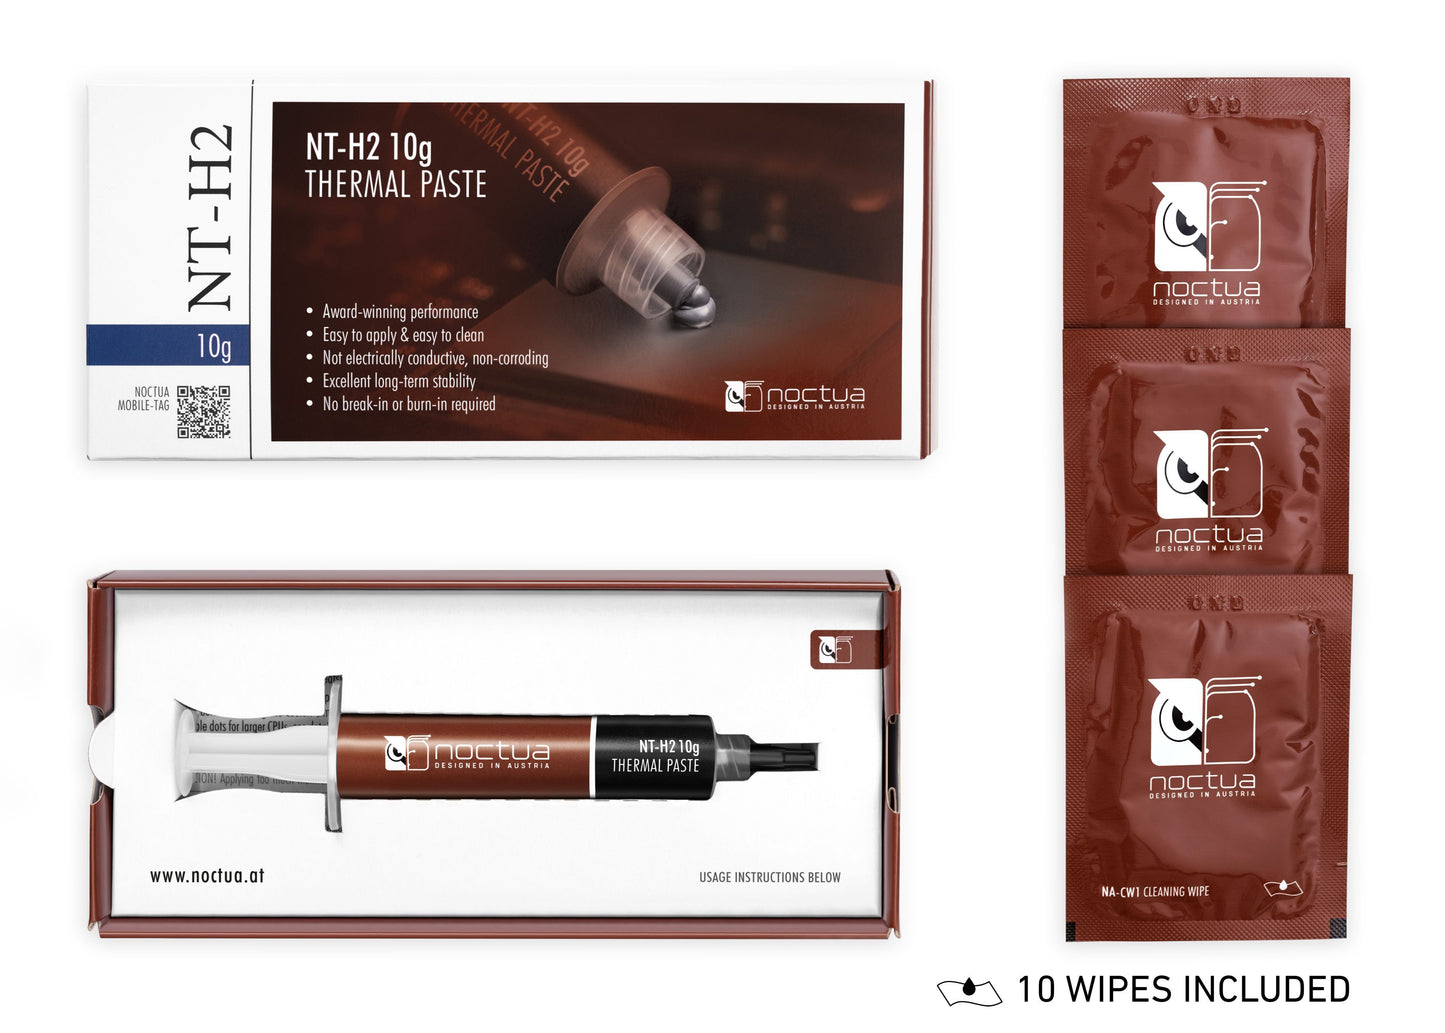 Noctua NT-H2 10g High Performance Thermal Paste (NT-H2-10)